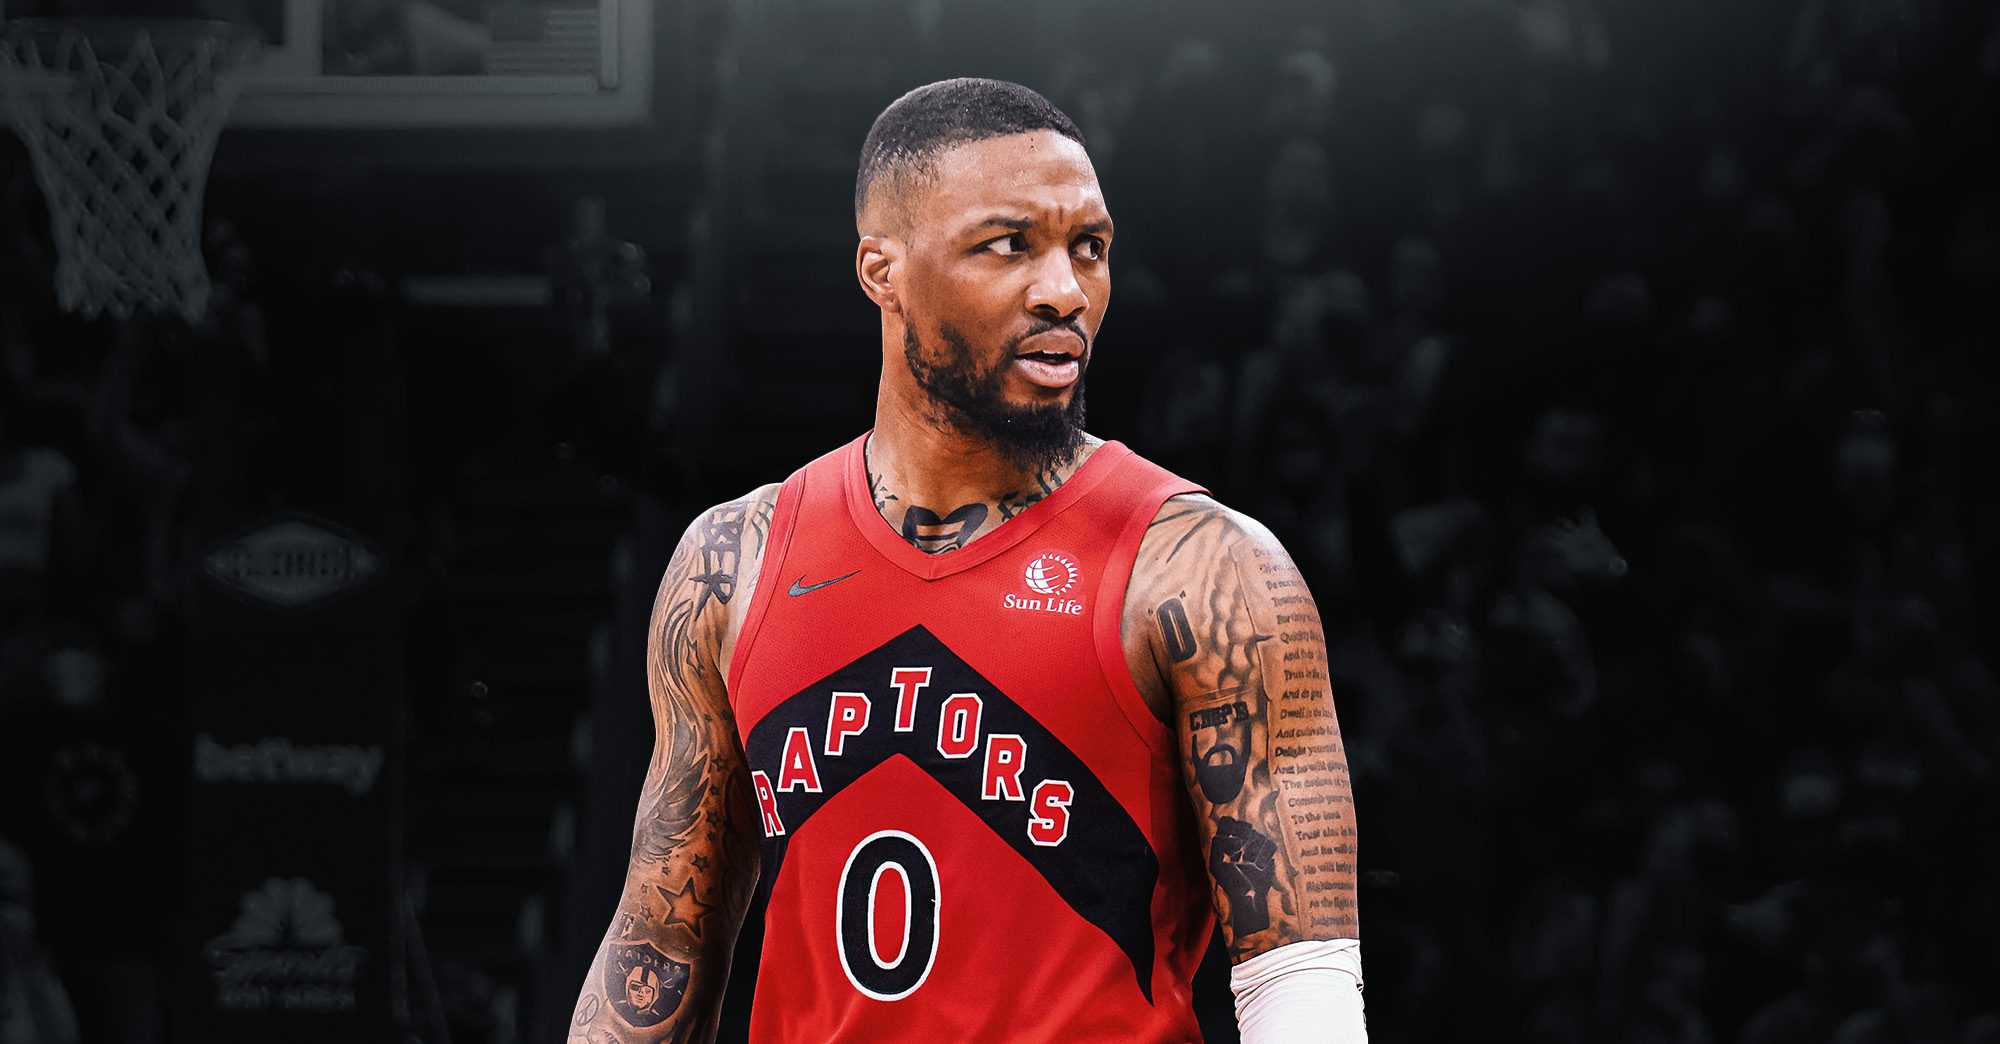 The Team Damian Lillard Would Make Things ‘Ugly’ For if Traded There